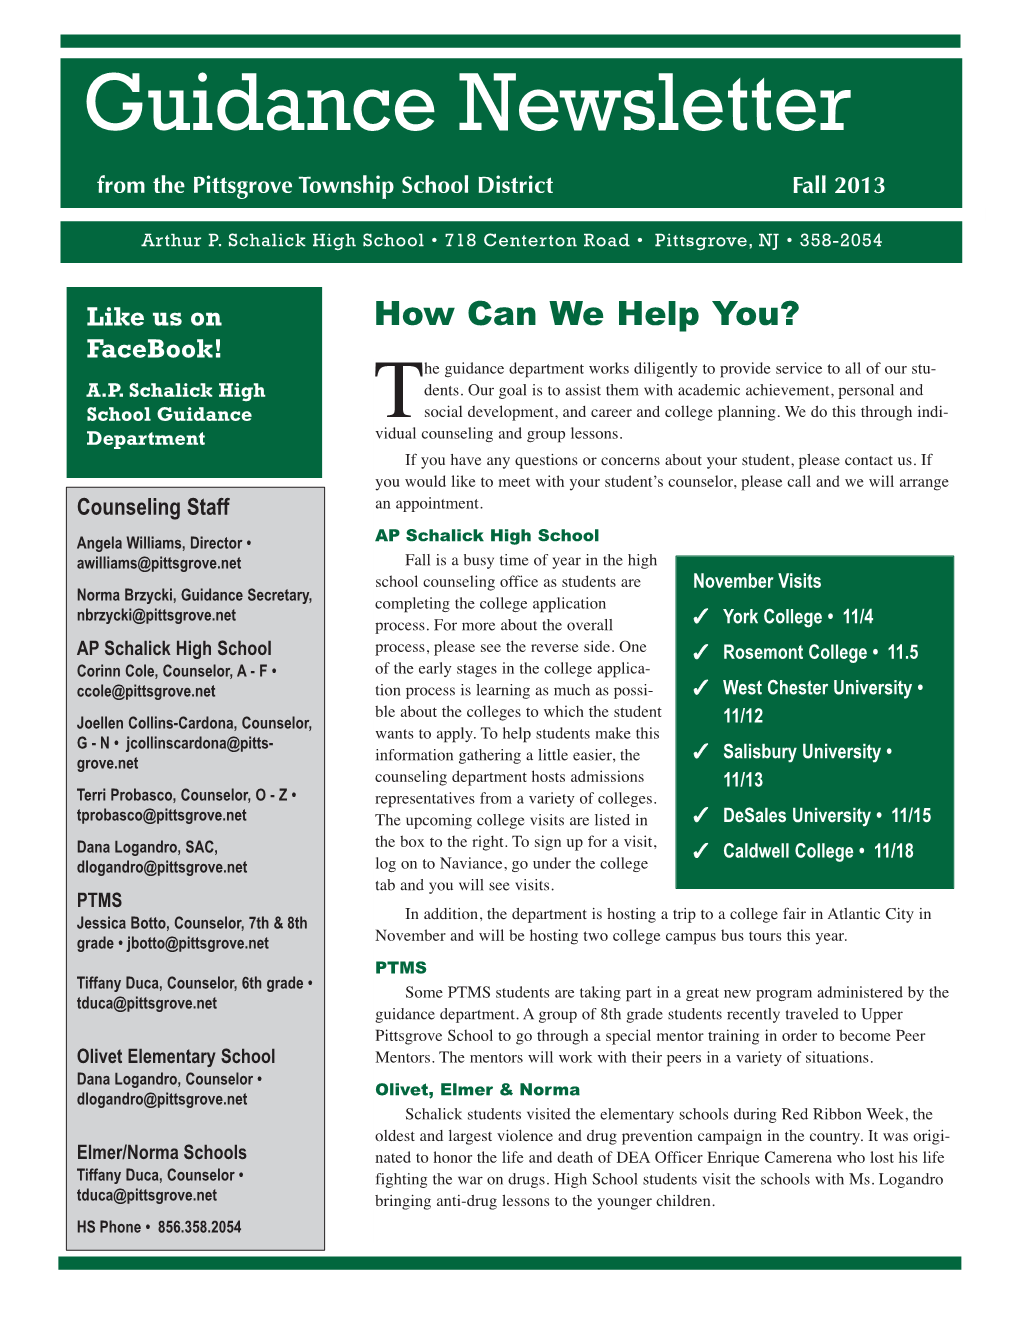 Guidance Newsletter from the Pittsgrove Township School District Fall 2013